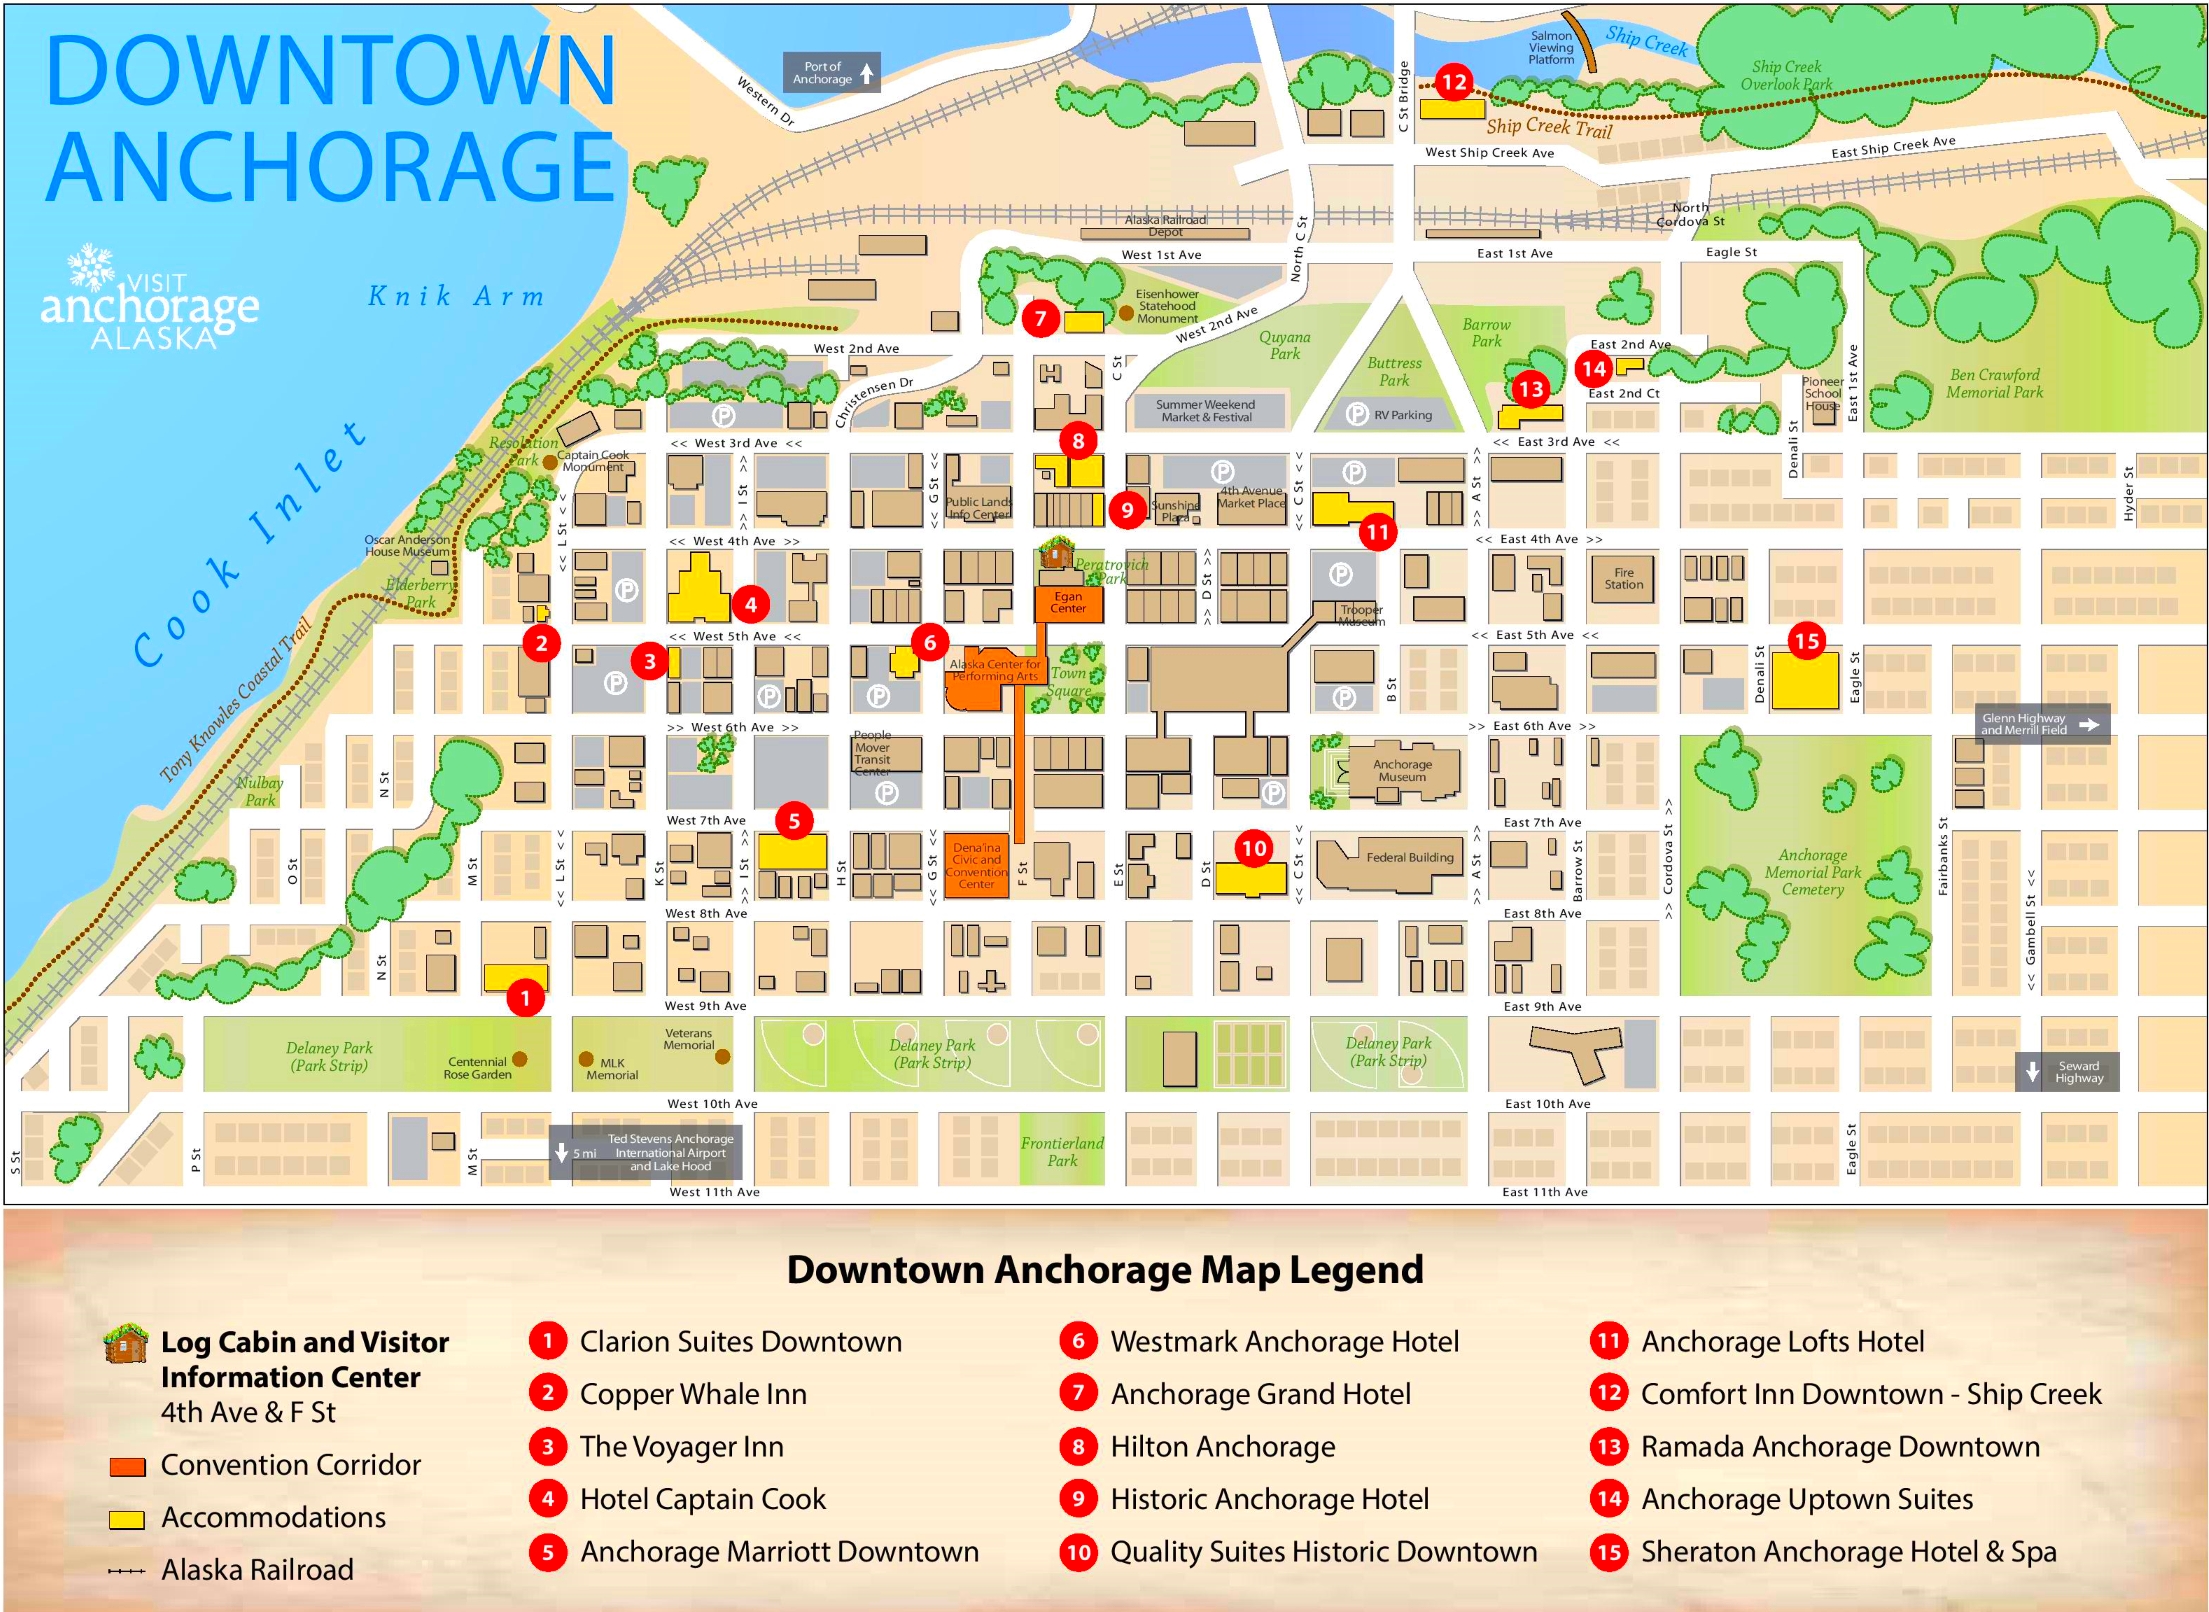 Anchorage downtown hotel map